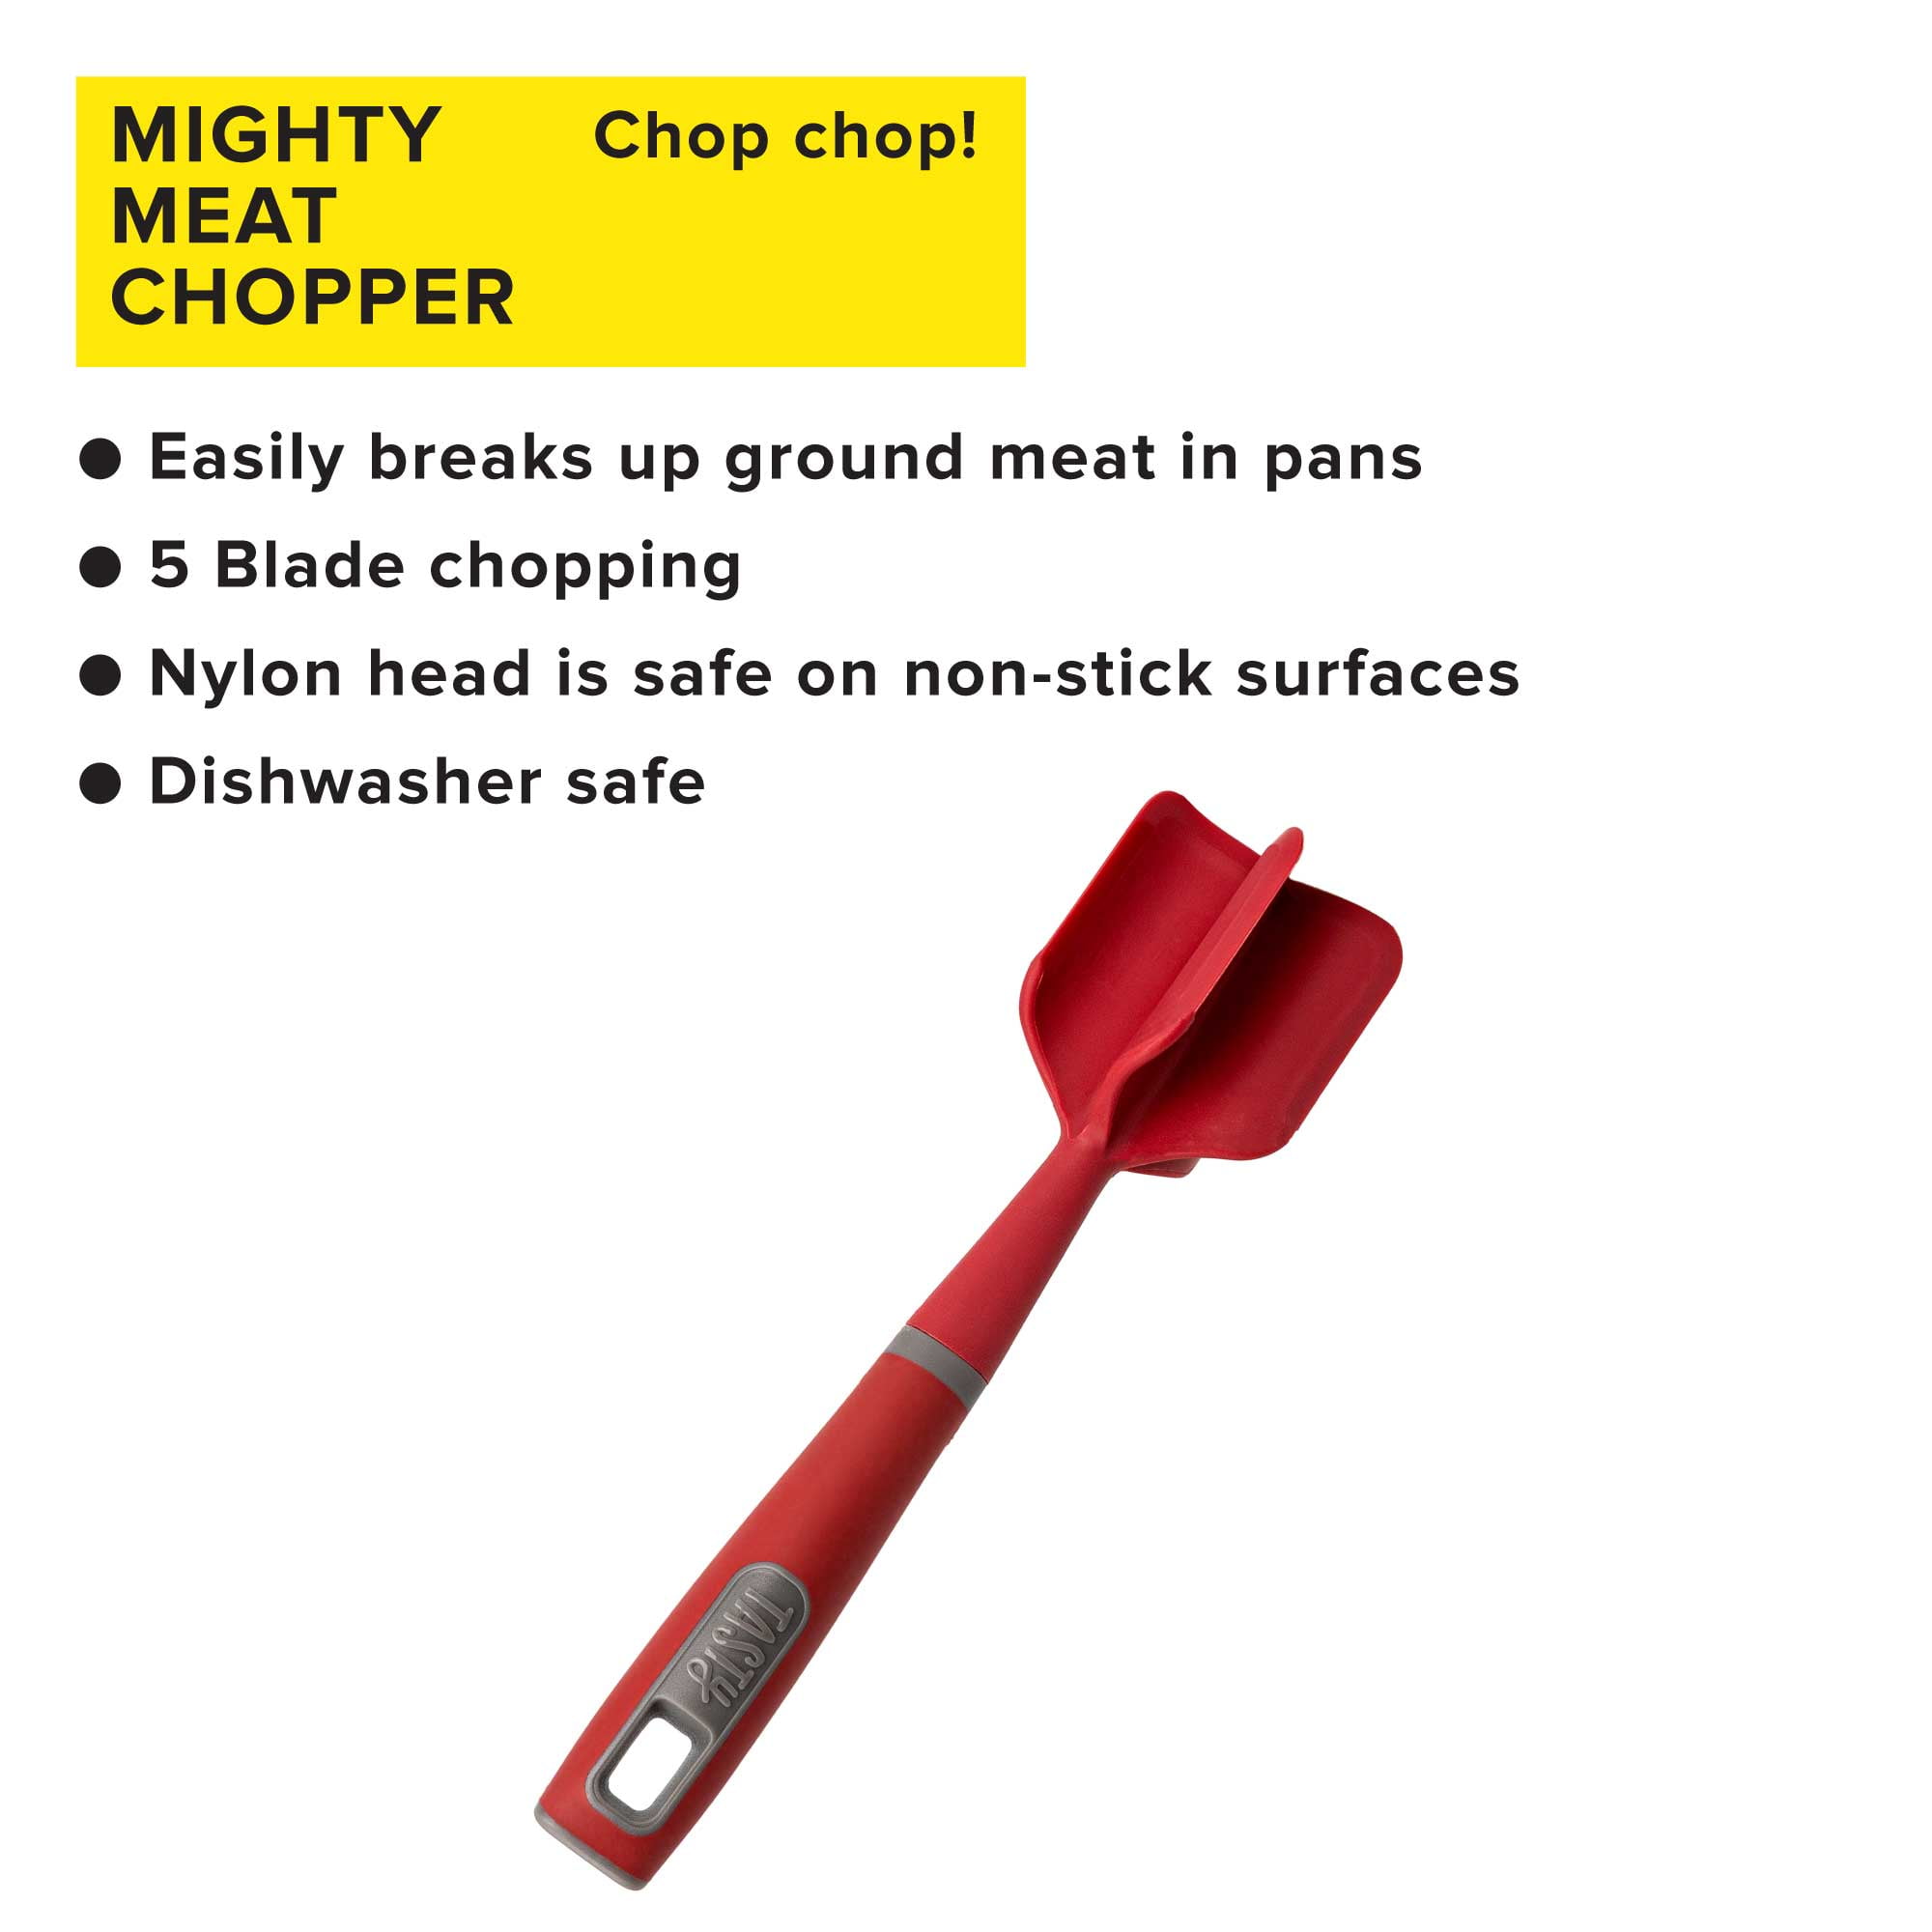 Packaged Meat Masher - گوشت کوب فلزی سبک